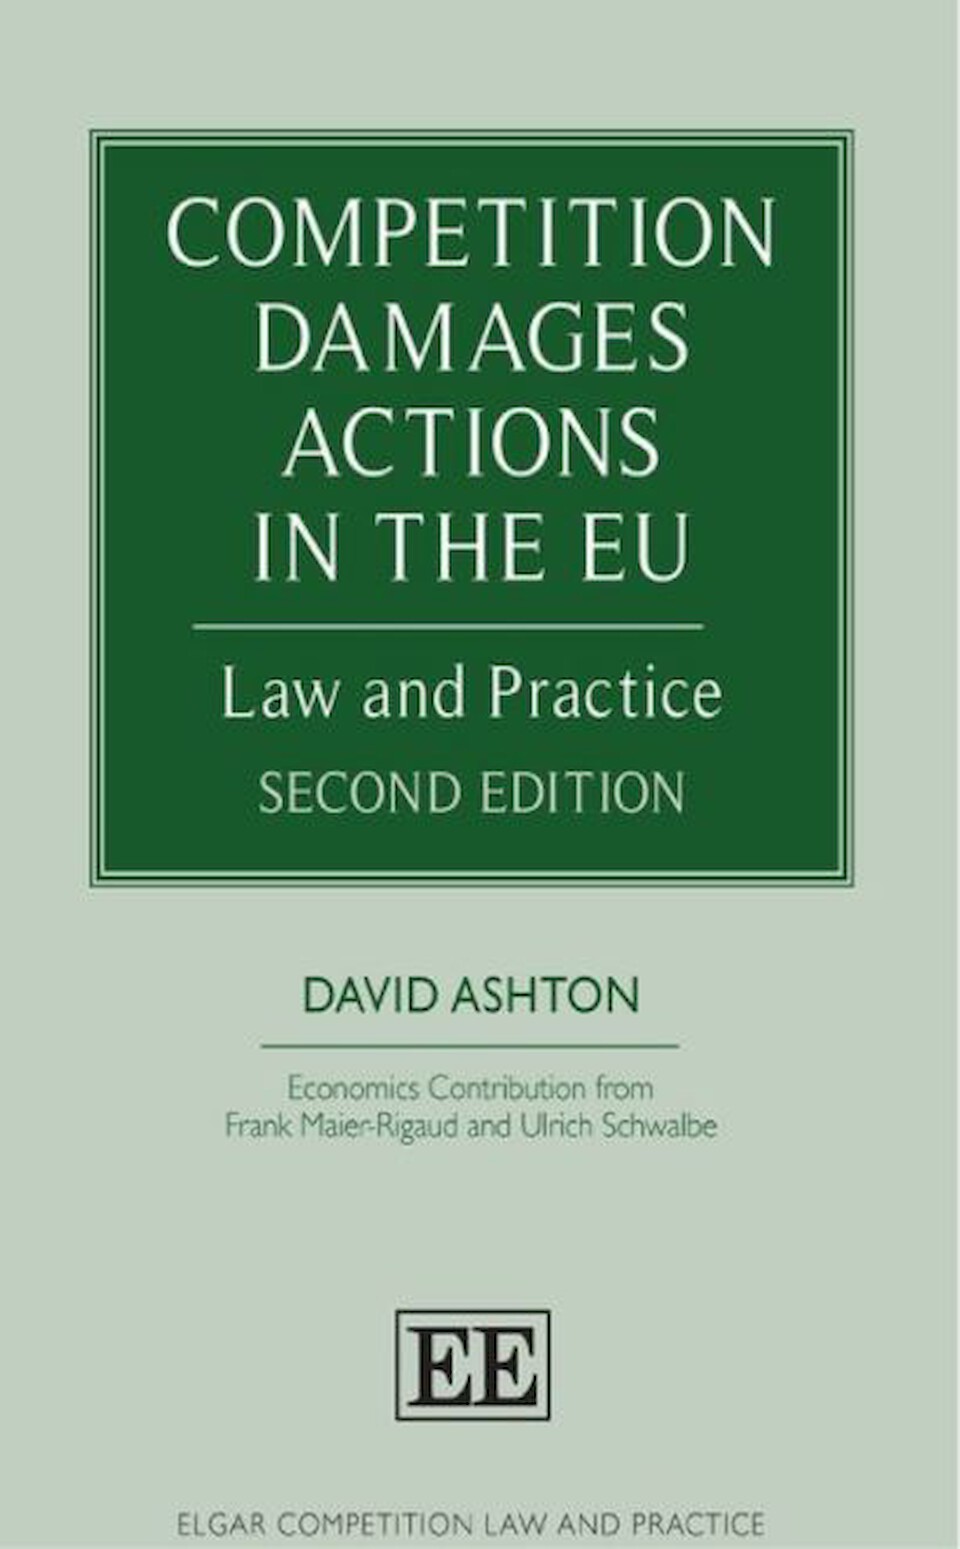 Competition Damages Actions in the EU, Law and Practice, Second Edition